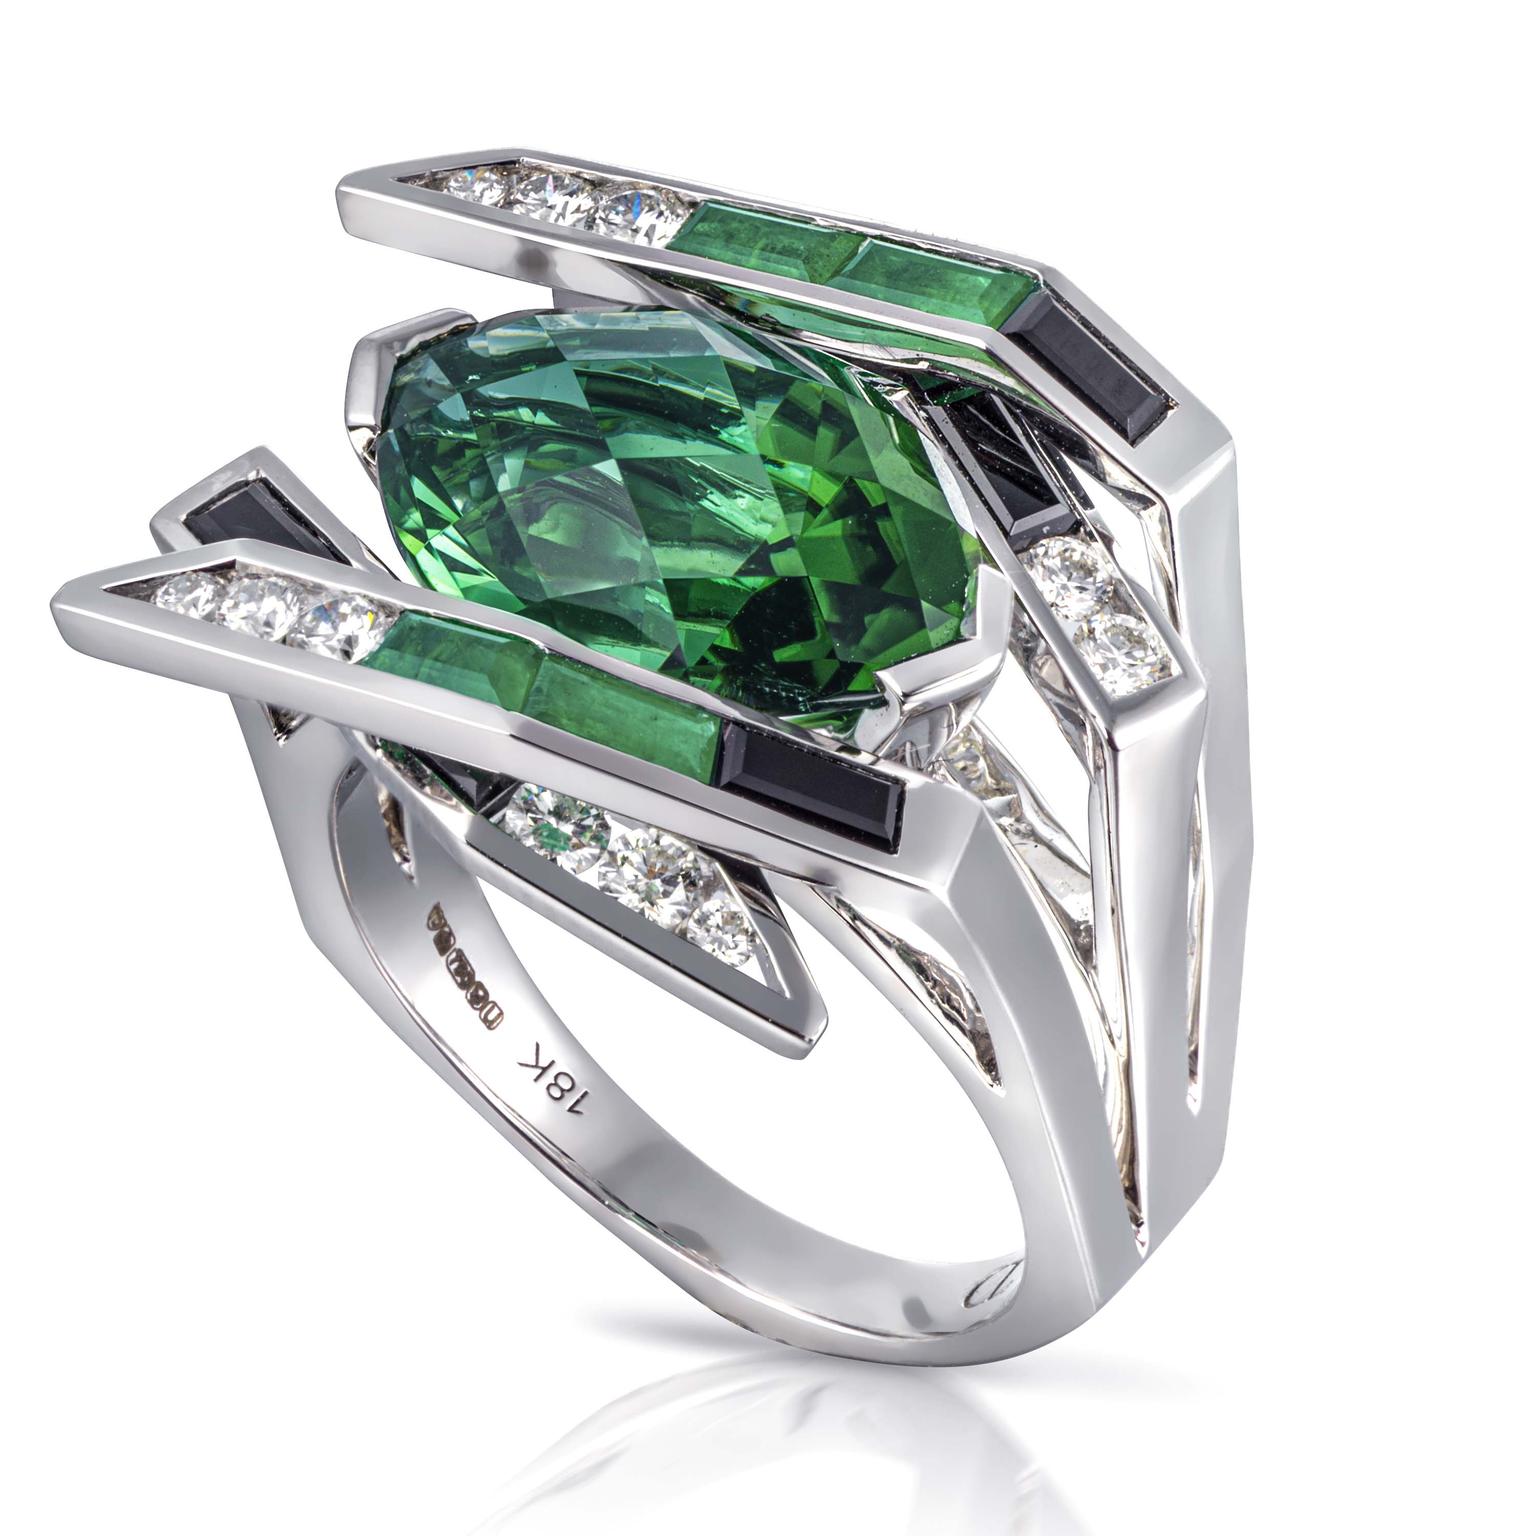 Electric night emerald and tourmaline cocktail ring by Tomasz Donocik